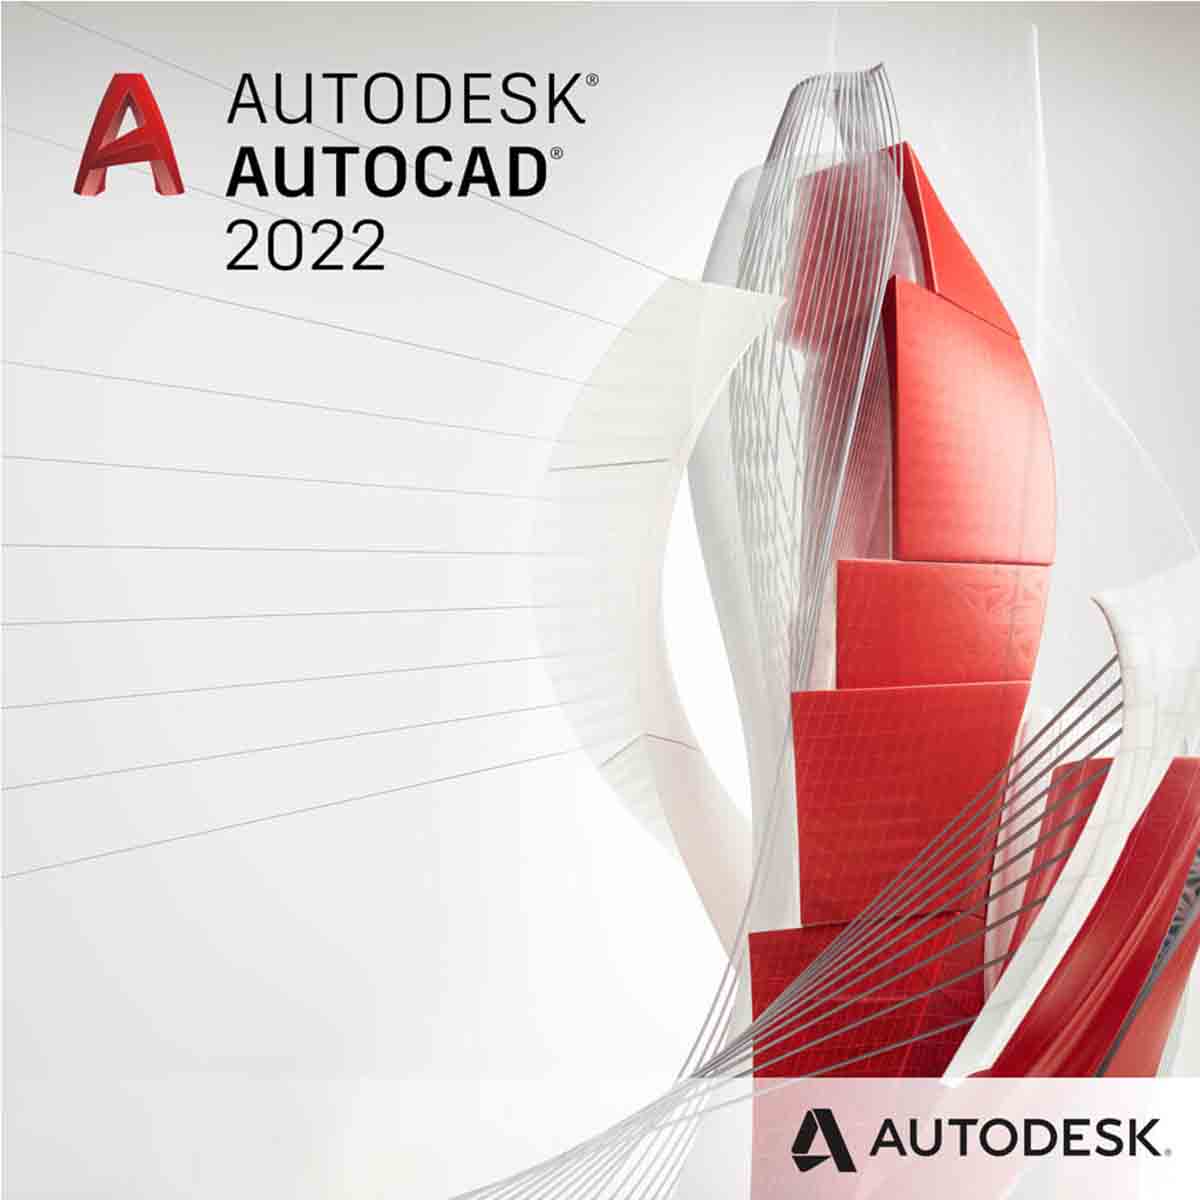 Buy Autodesk Autocad 2022 software or windows software at the best and cheap price on Fastestkey.com.